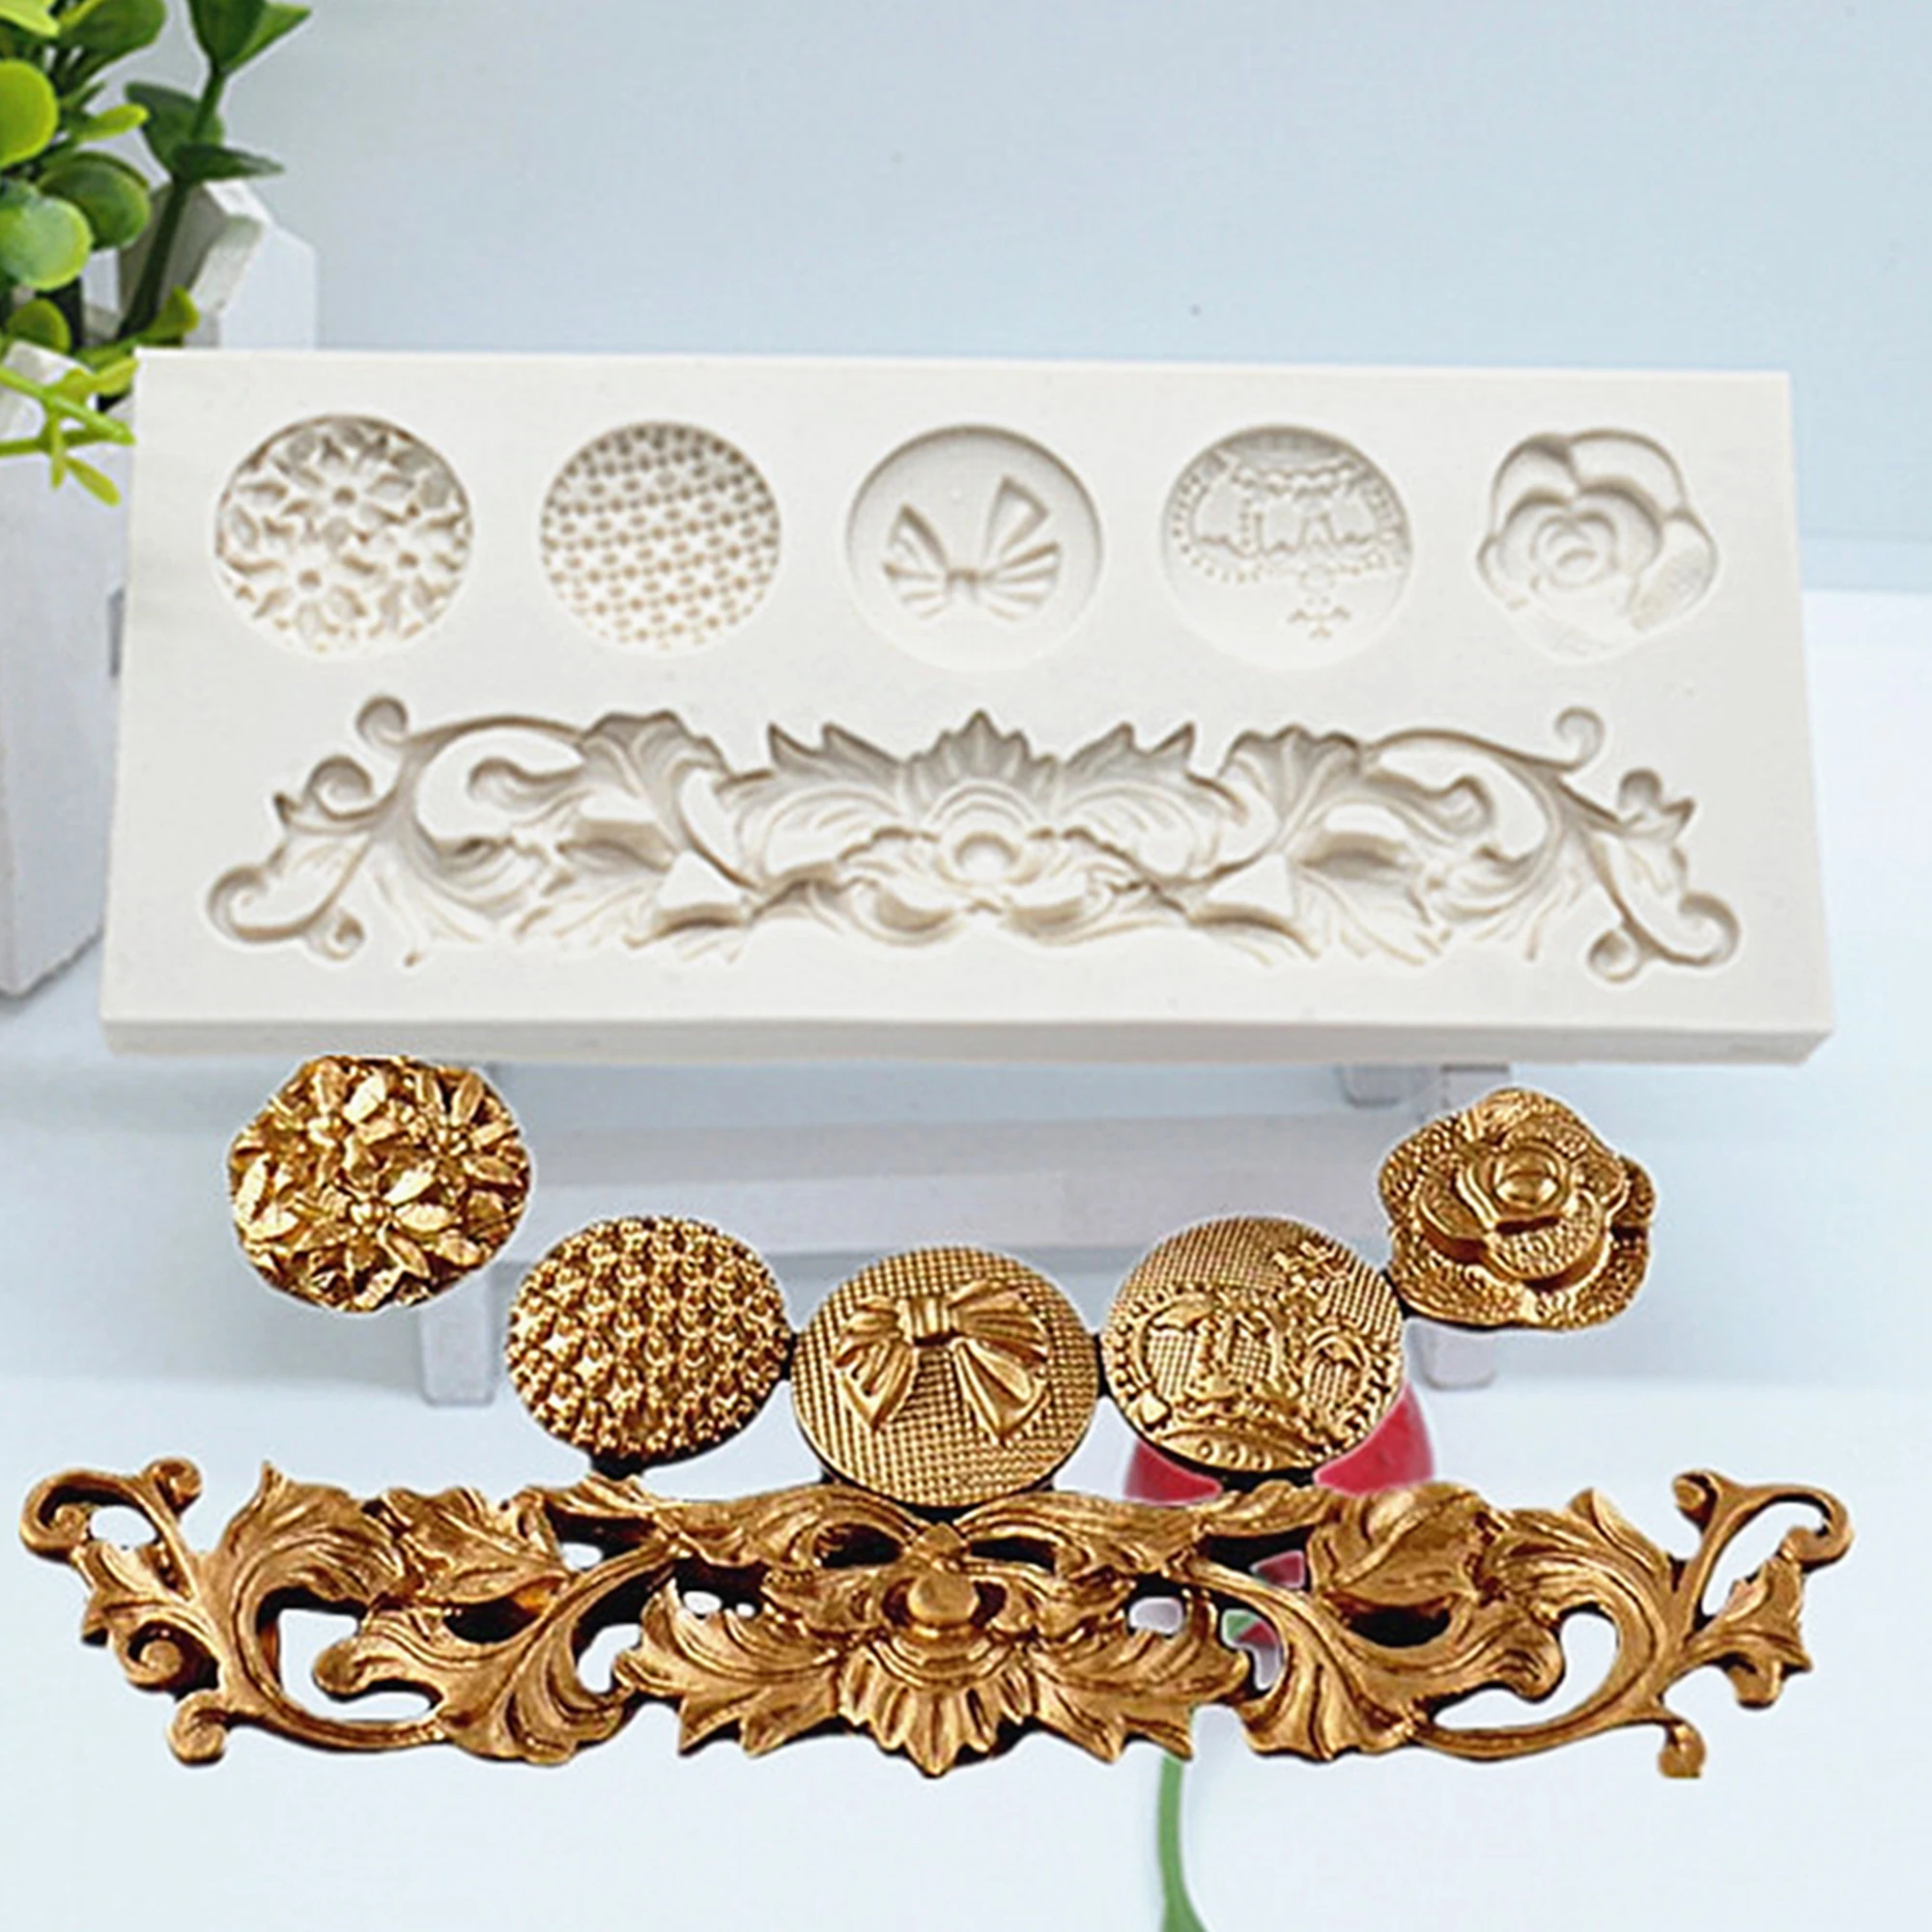 

Flower Button Lace Silicone Mold For Baking Fondant Cake Decorating Tools Gumpaste Sugarcraft Chocolate Bakeware Tools M792